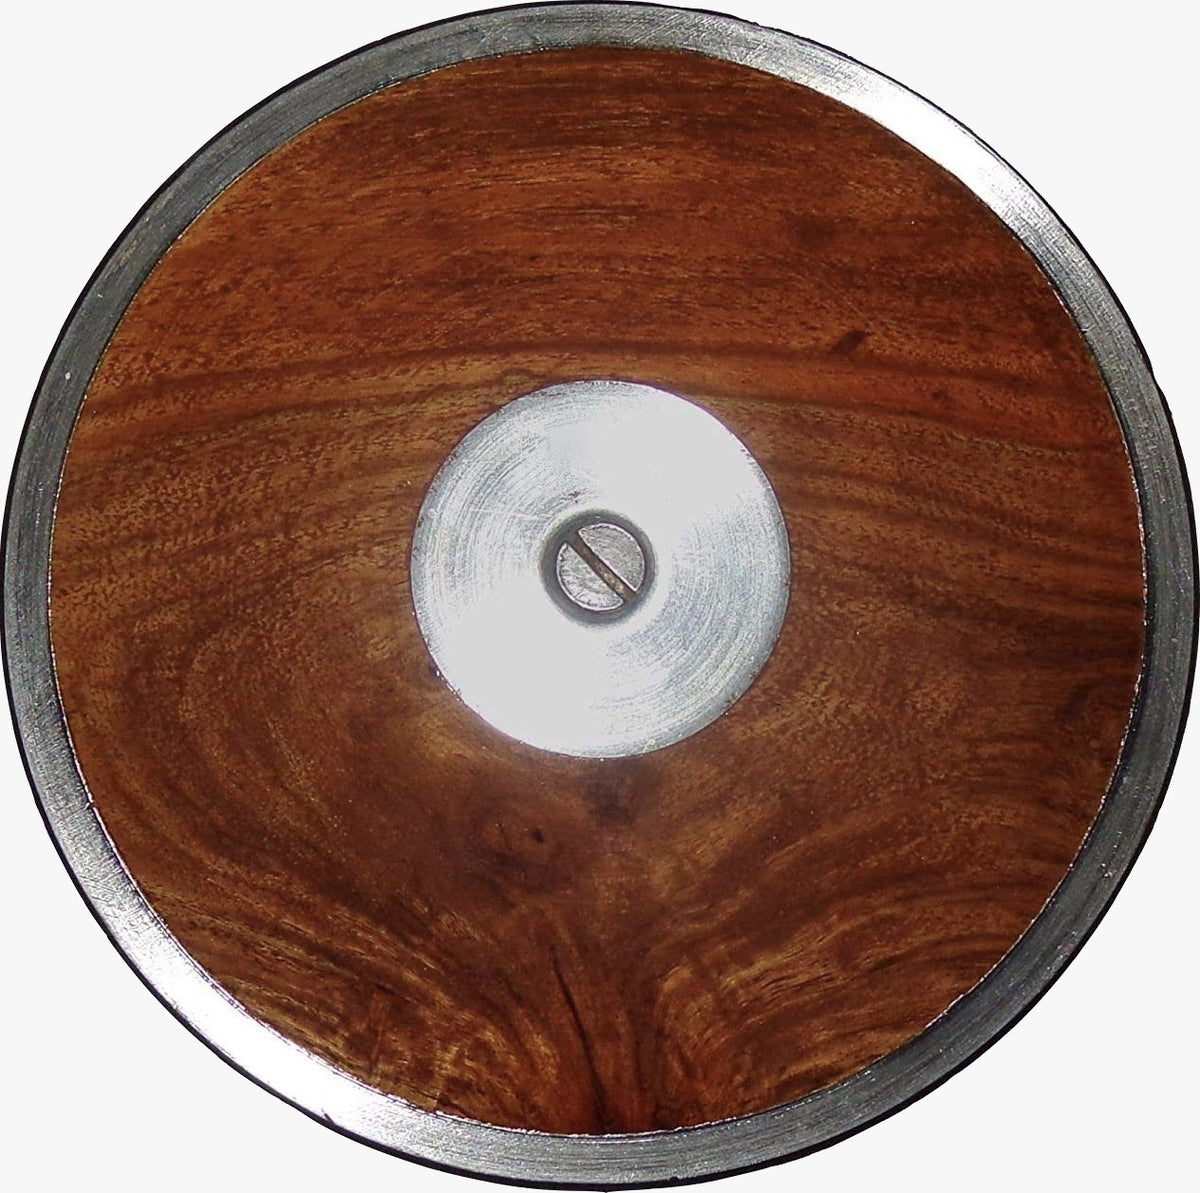 Wooden Discus With Steel Rim